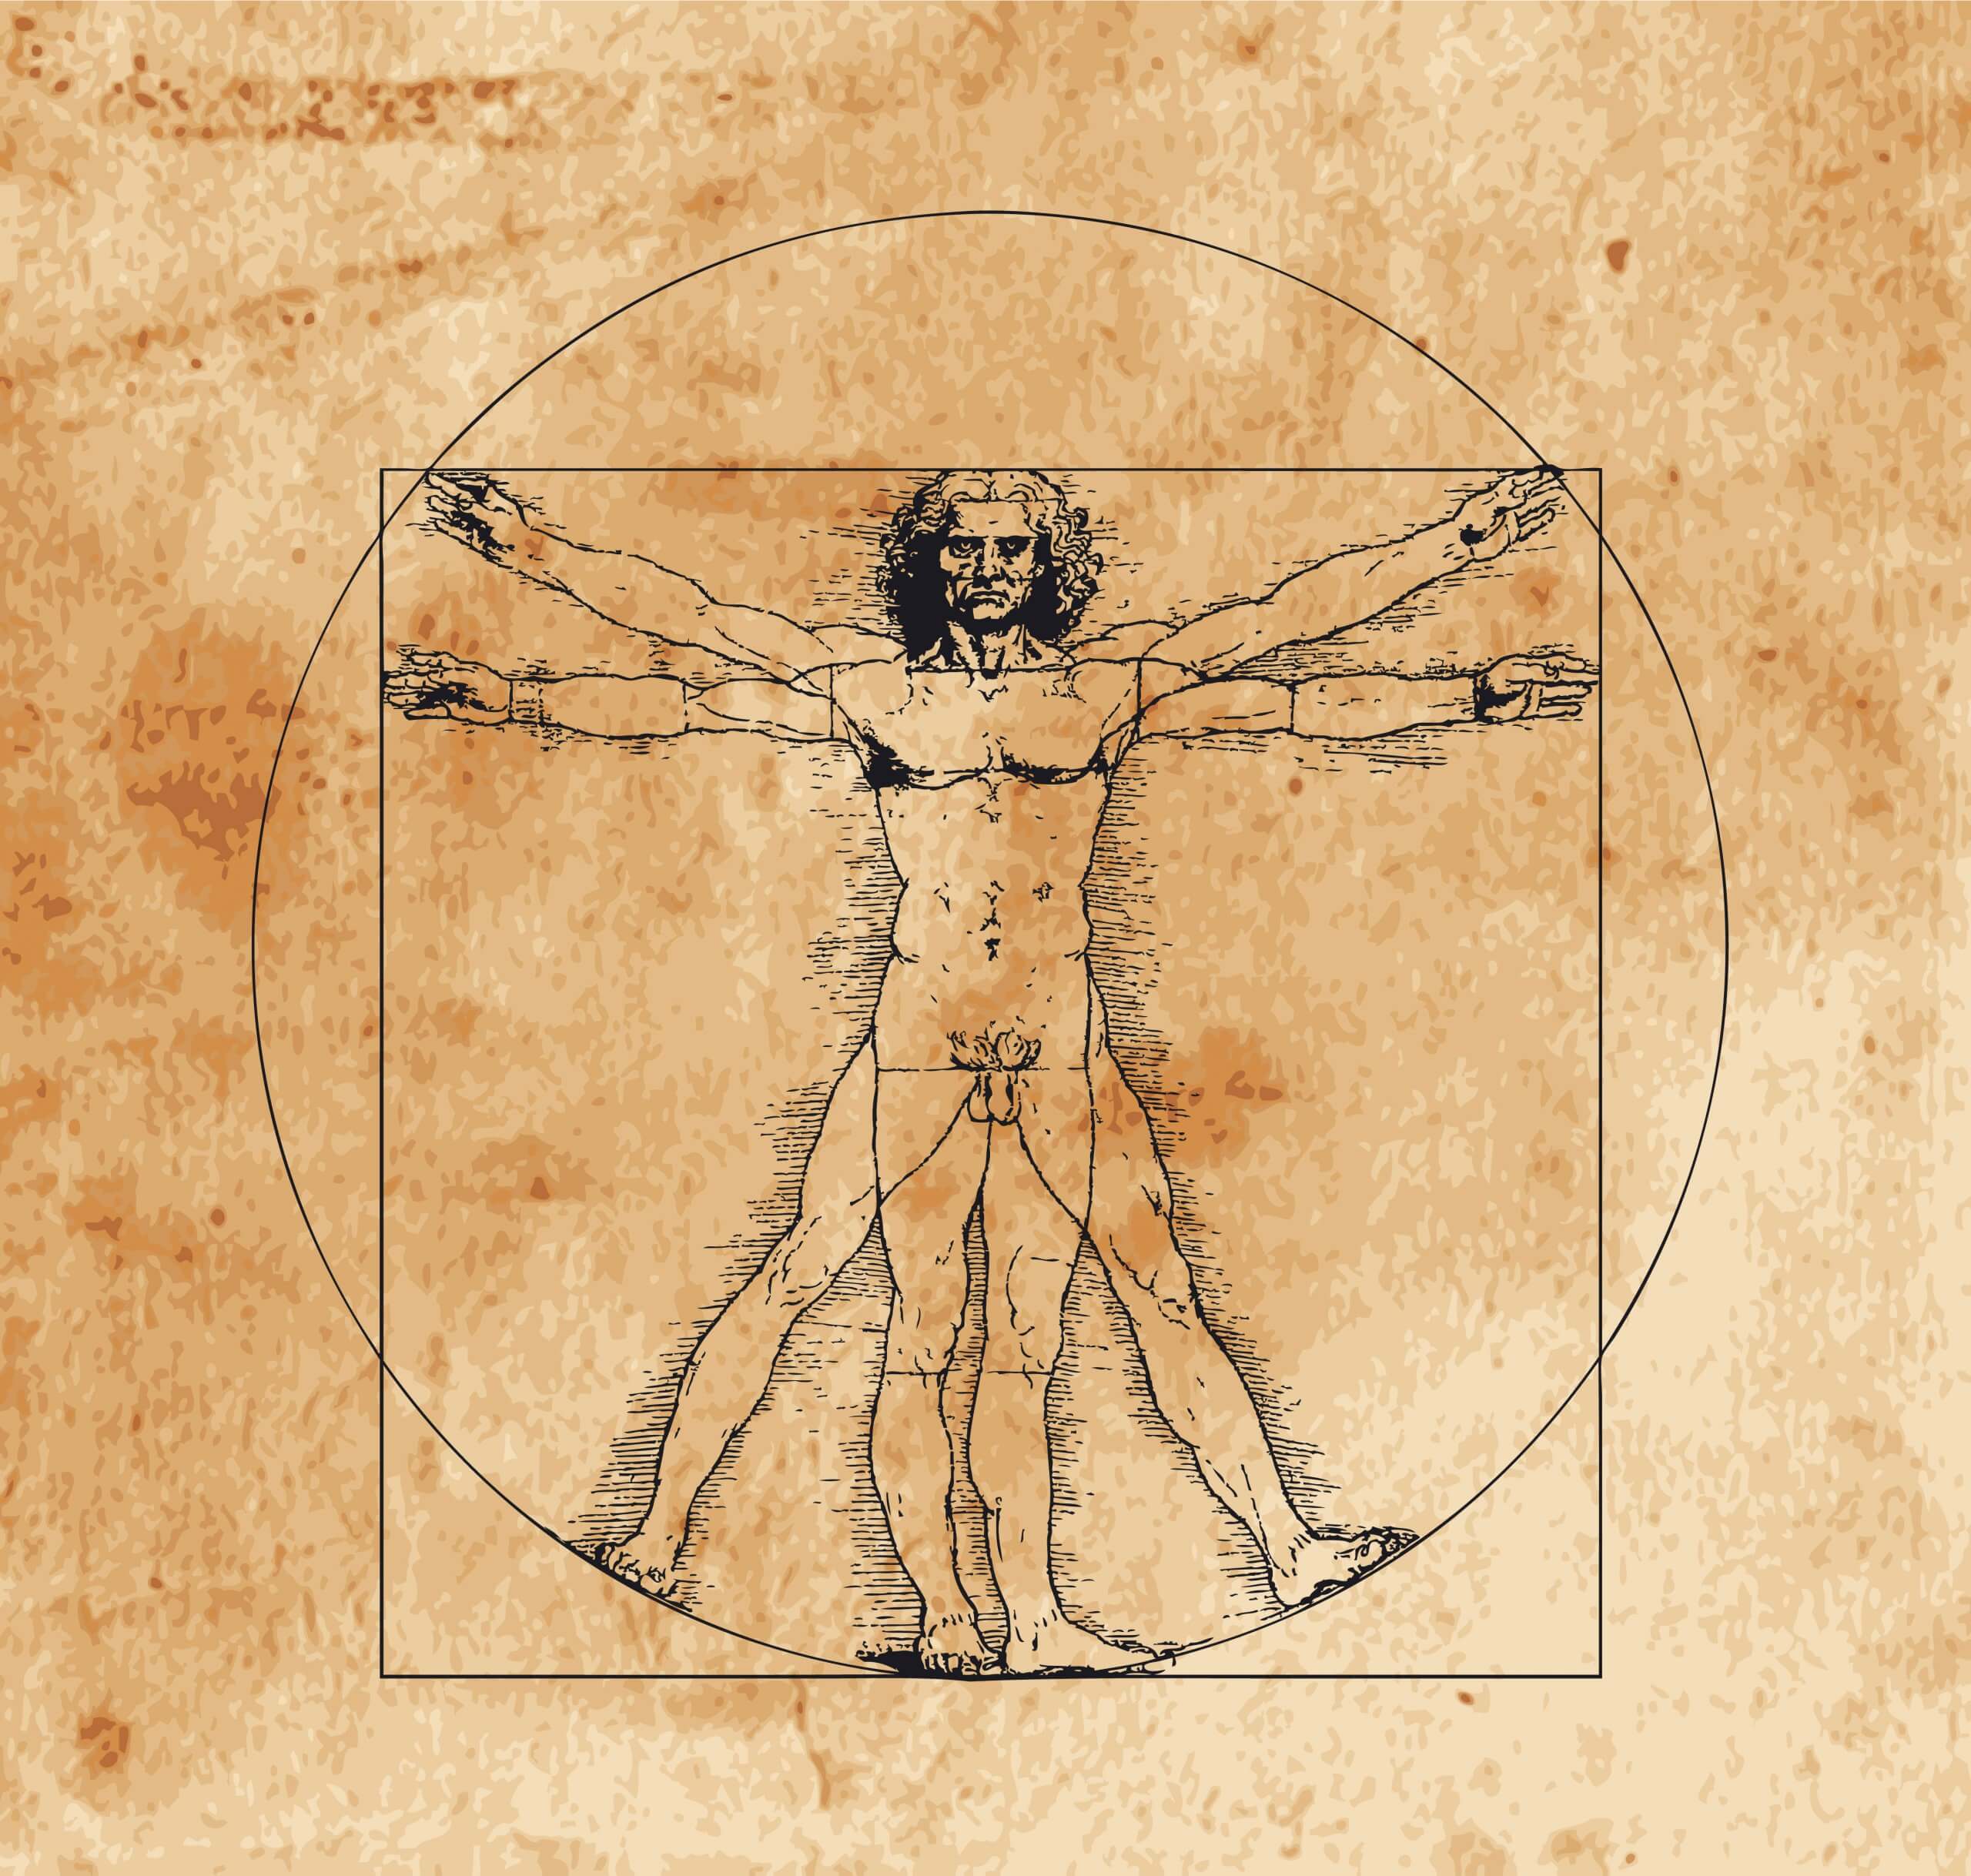 A highly stylized drawing of vitruvian man with crosshatching and sepia tones